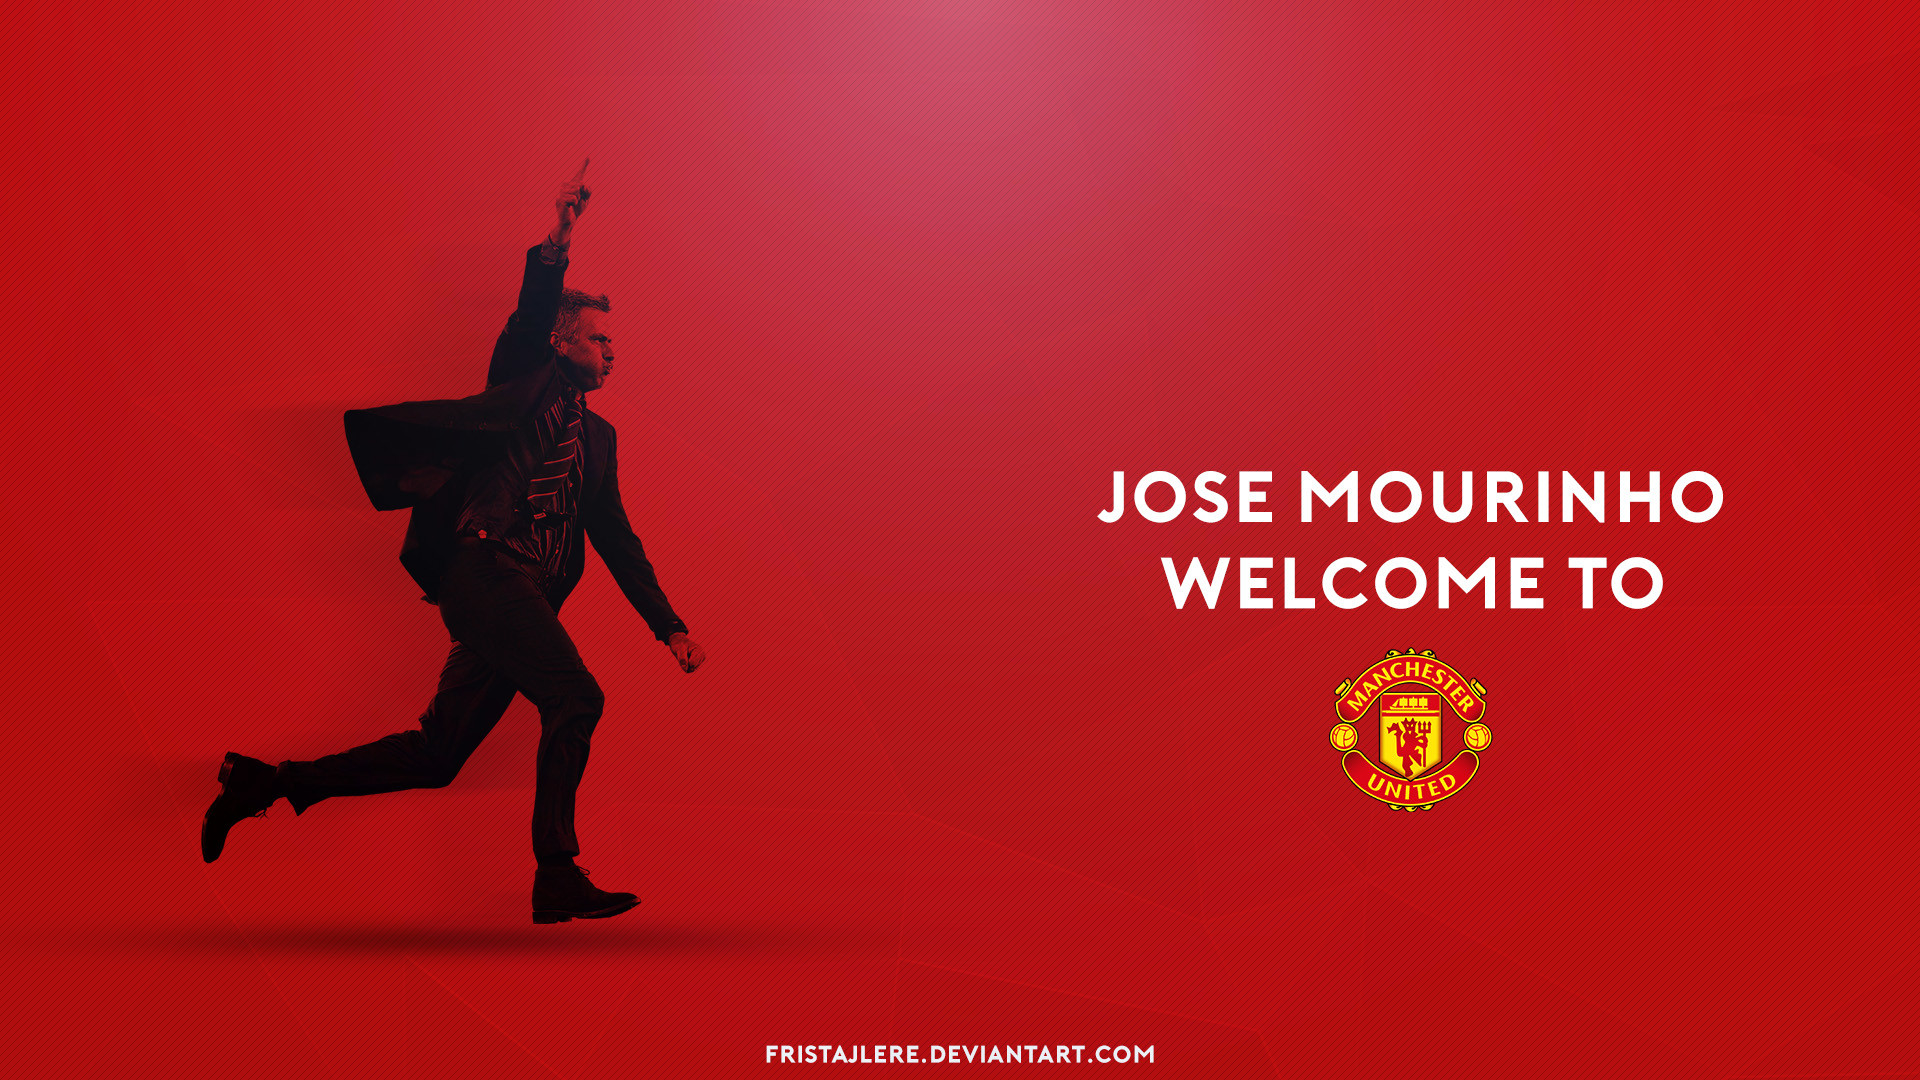 1920x1080 ... Jose Mourinho Welcome to Manchester United by Fristajlere